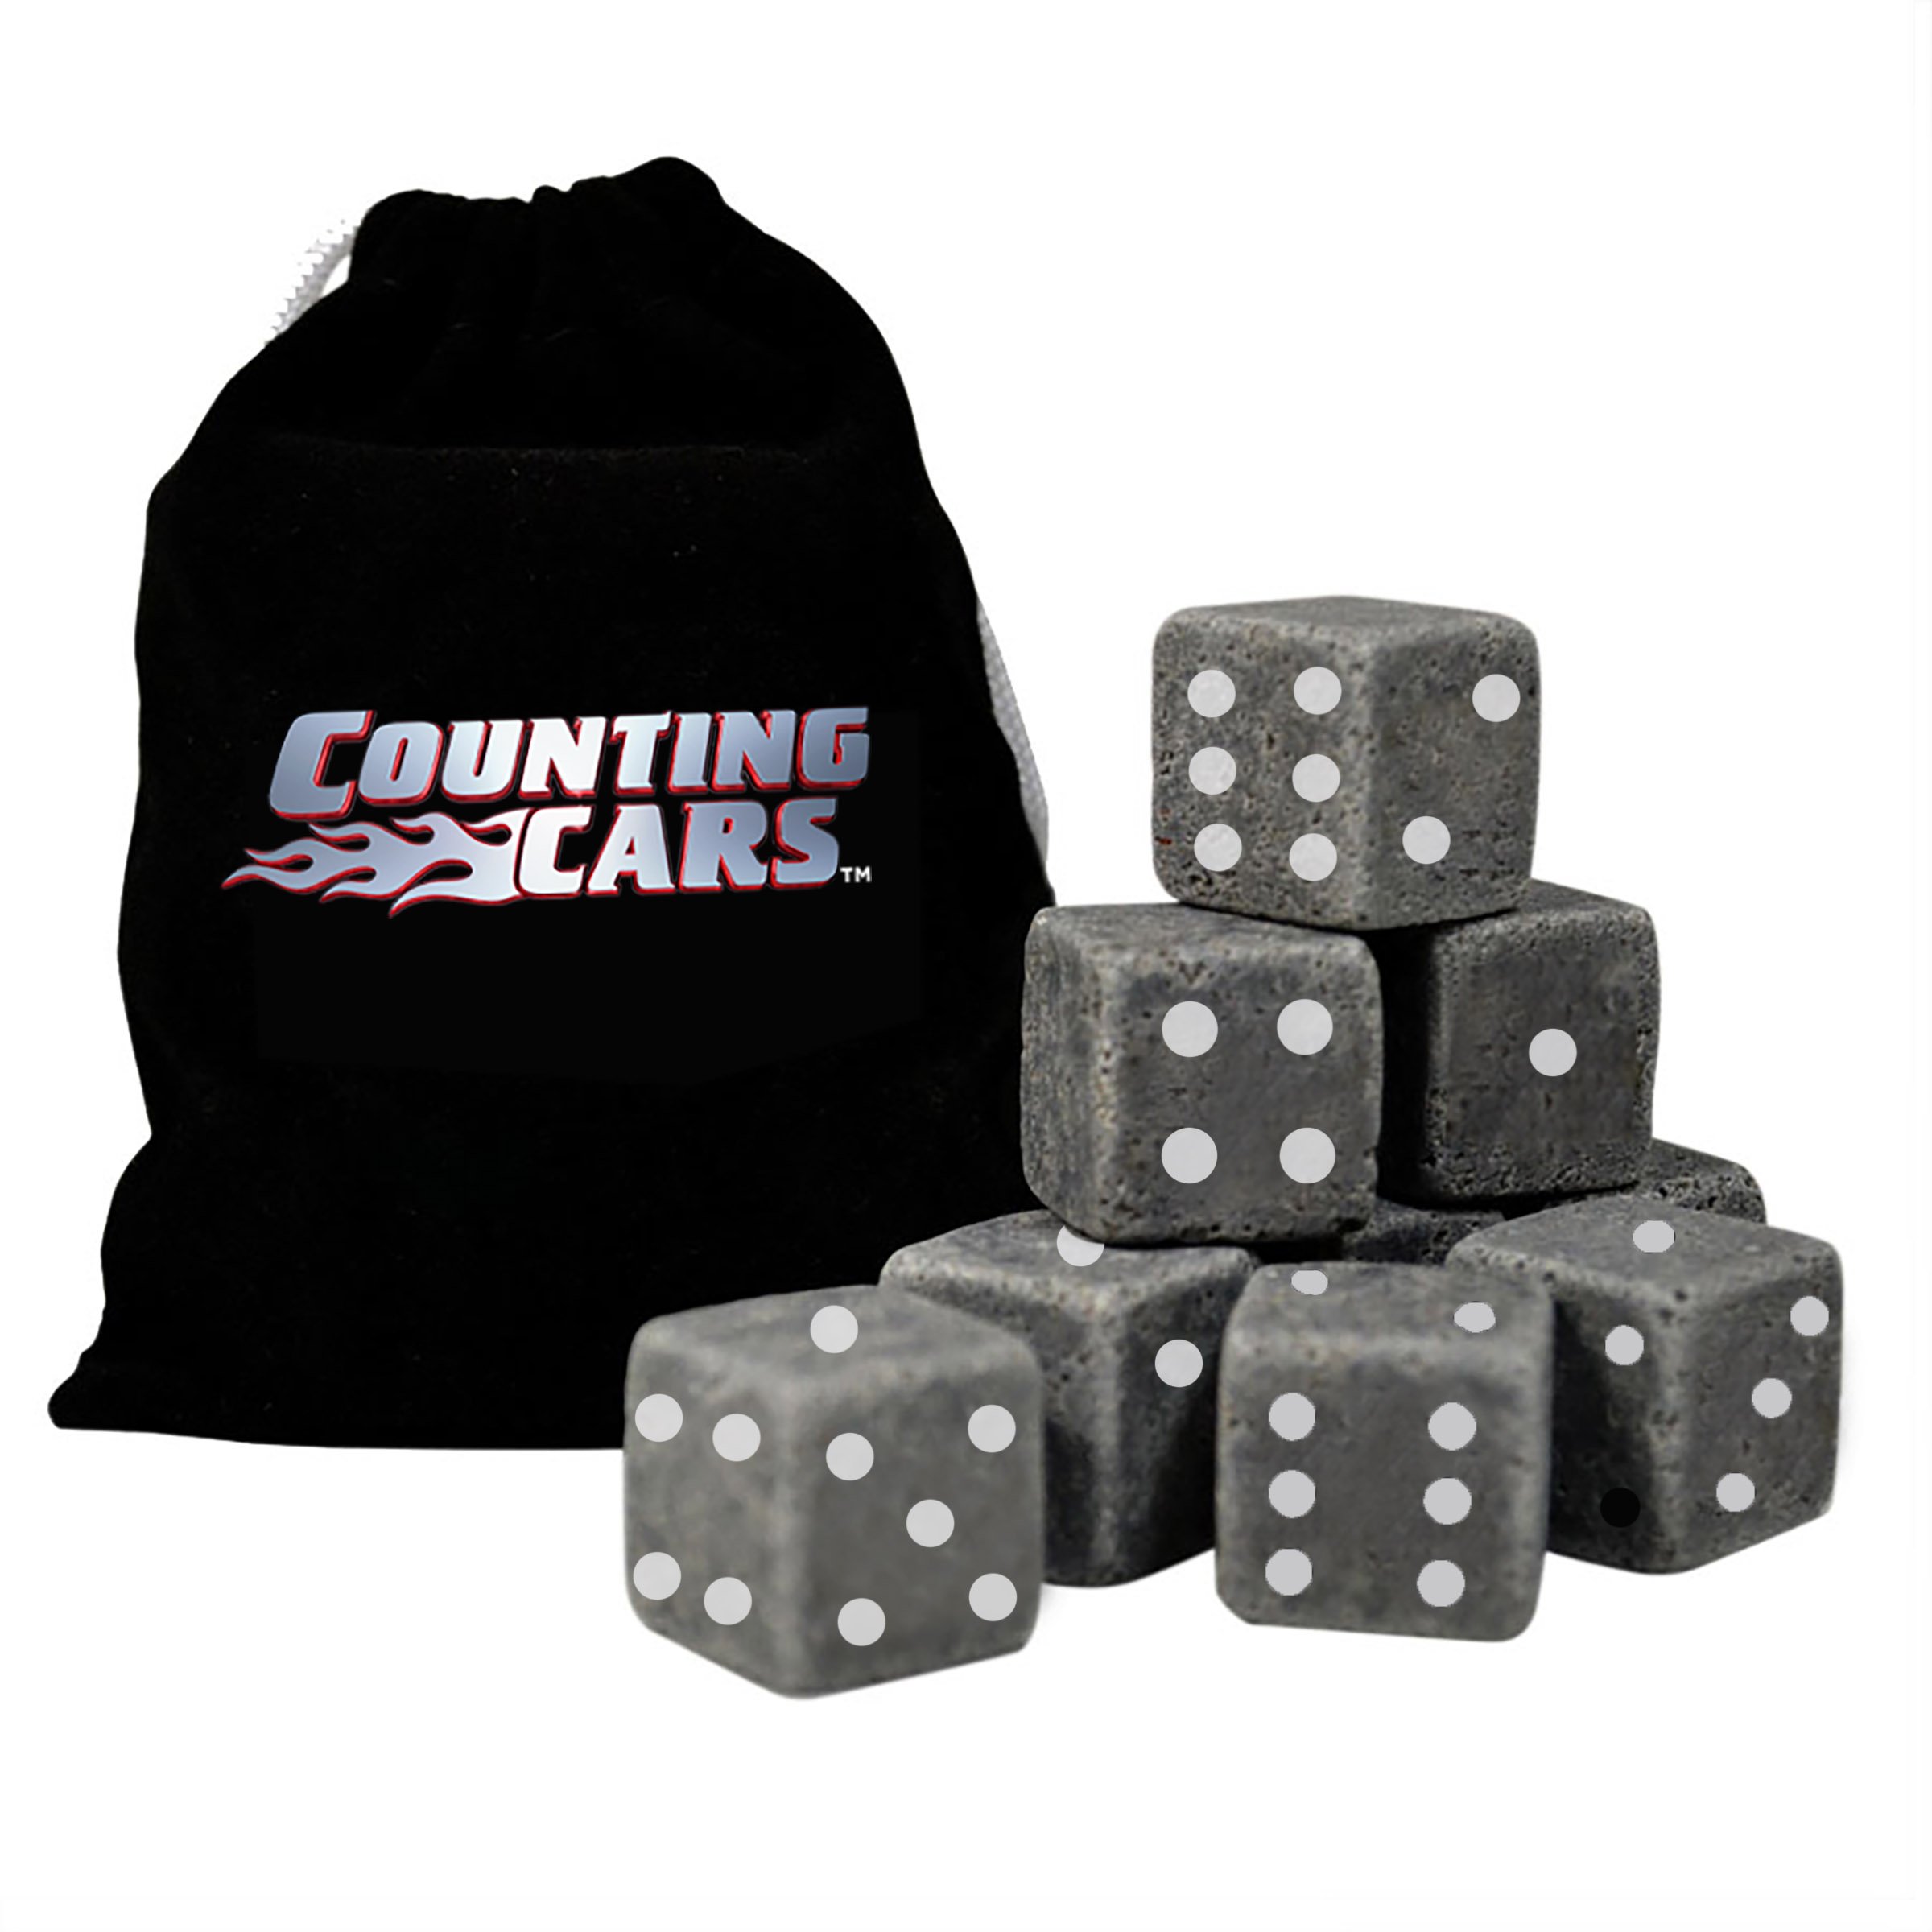 Counting Cars_Whiskey Dice Stones.jpg